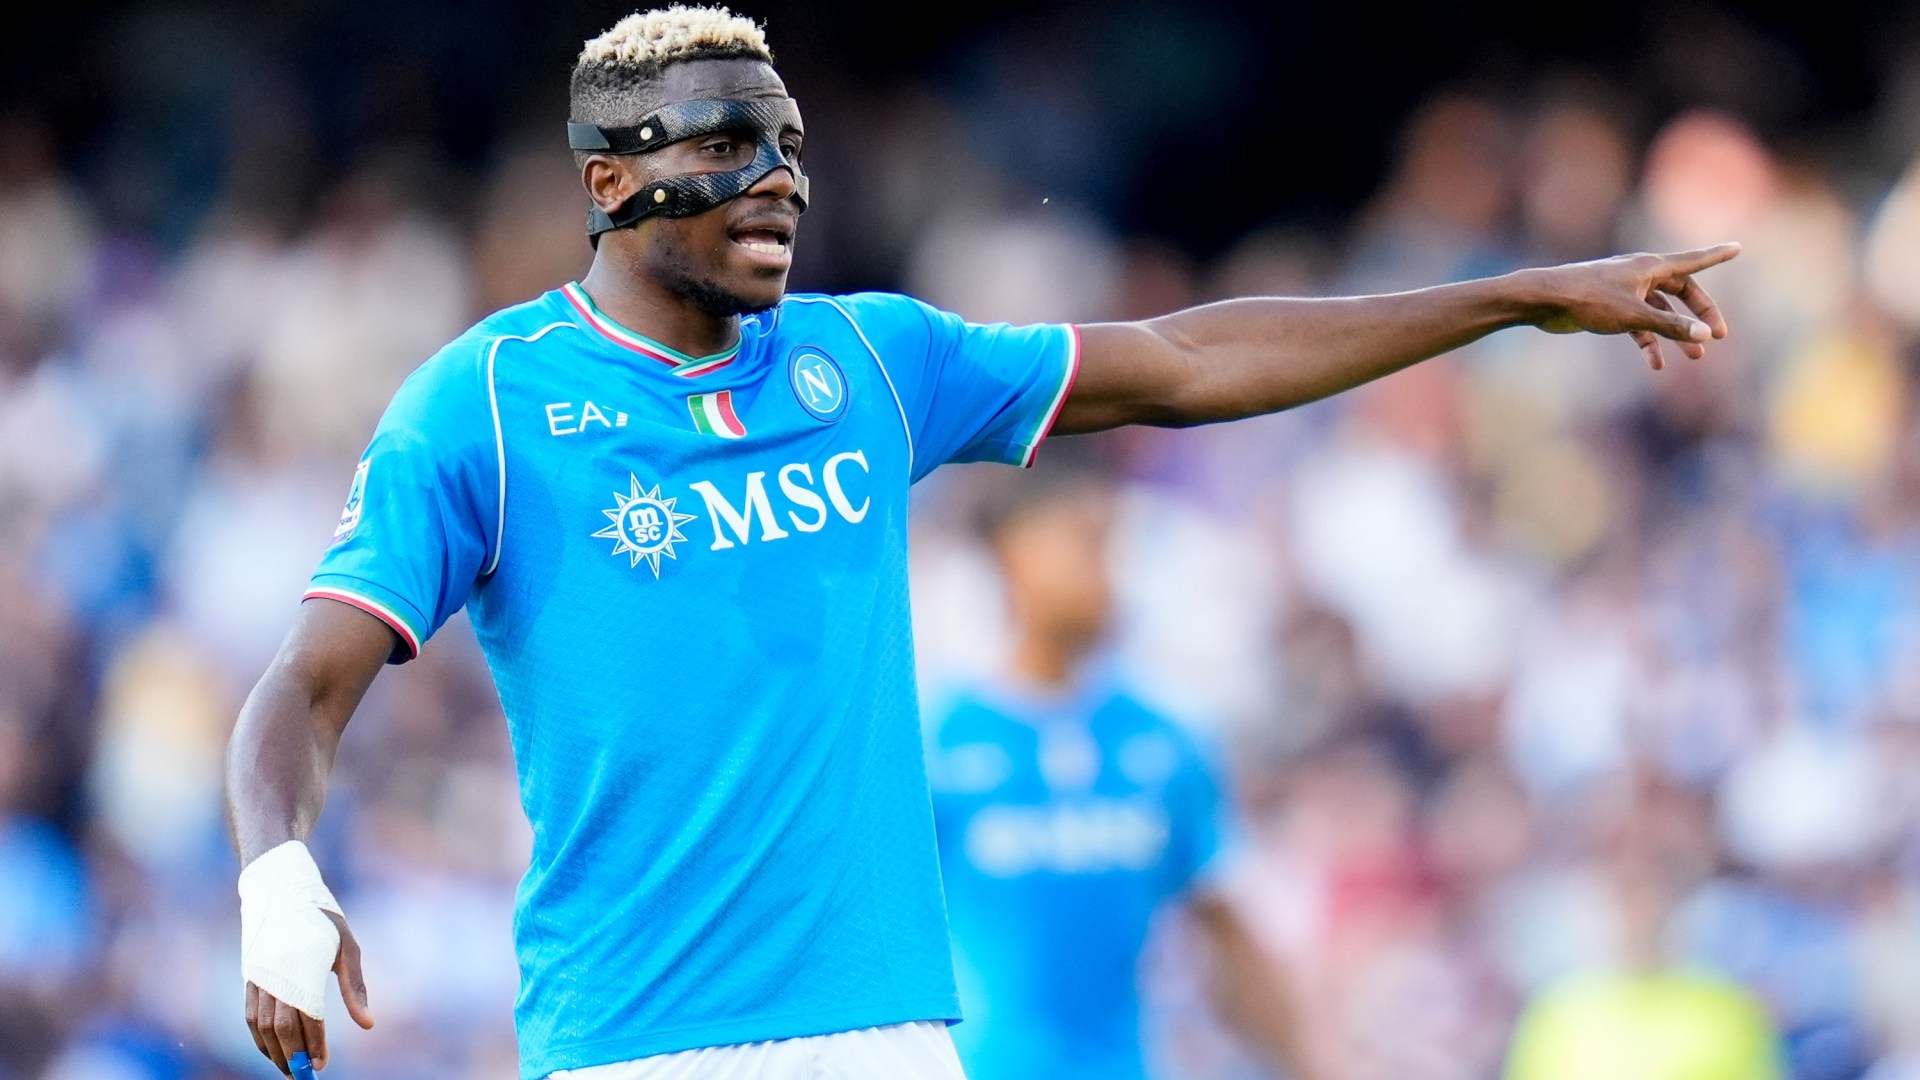 Man Utd, Chelsea and Arsenal transfer boost as ‘Napoli eye Victor Osimhen replacement’ in Premier League raid [Video]